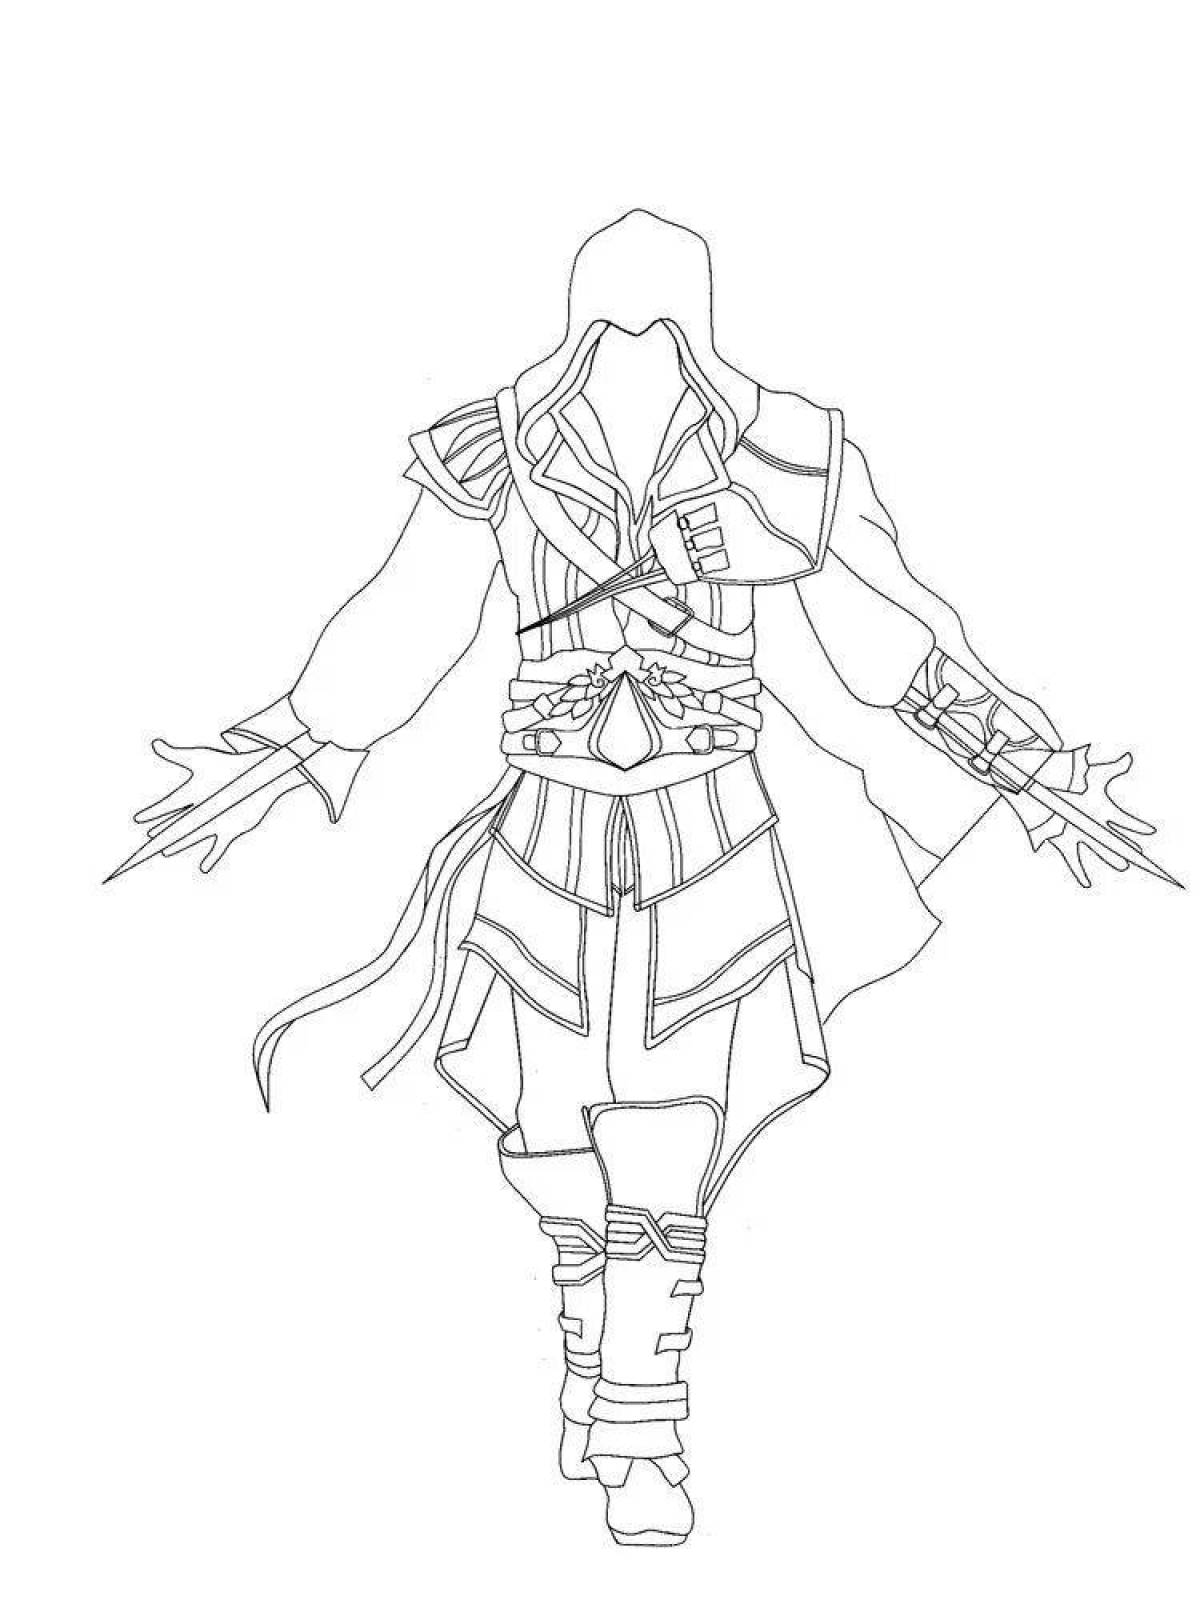 Colorful assassinscreed coloring page